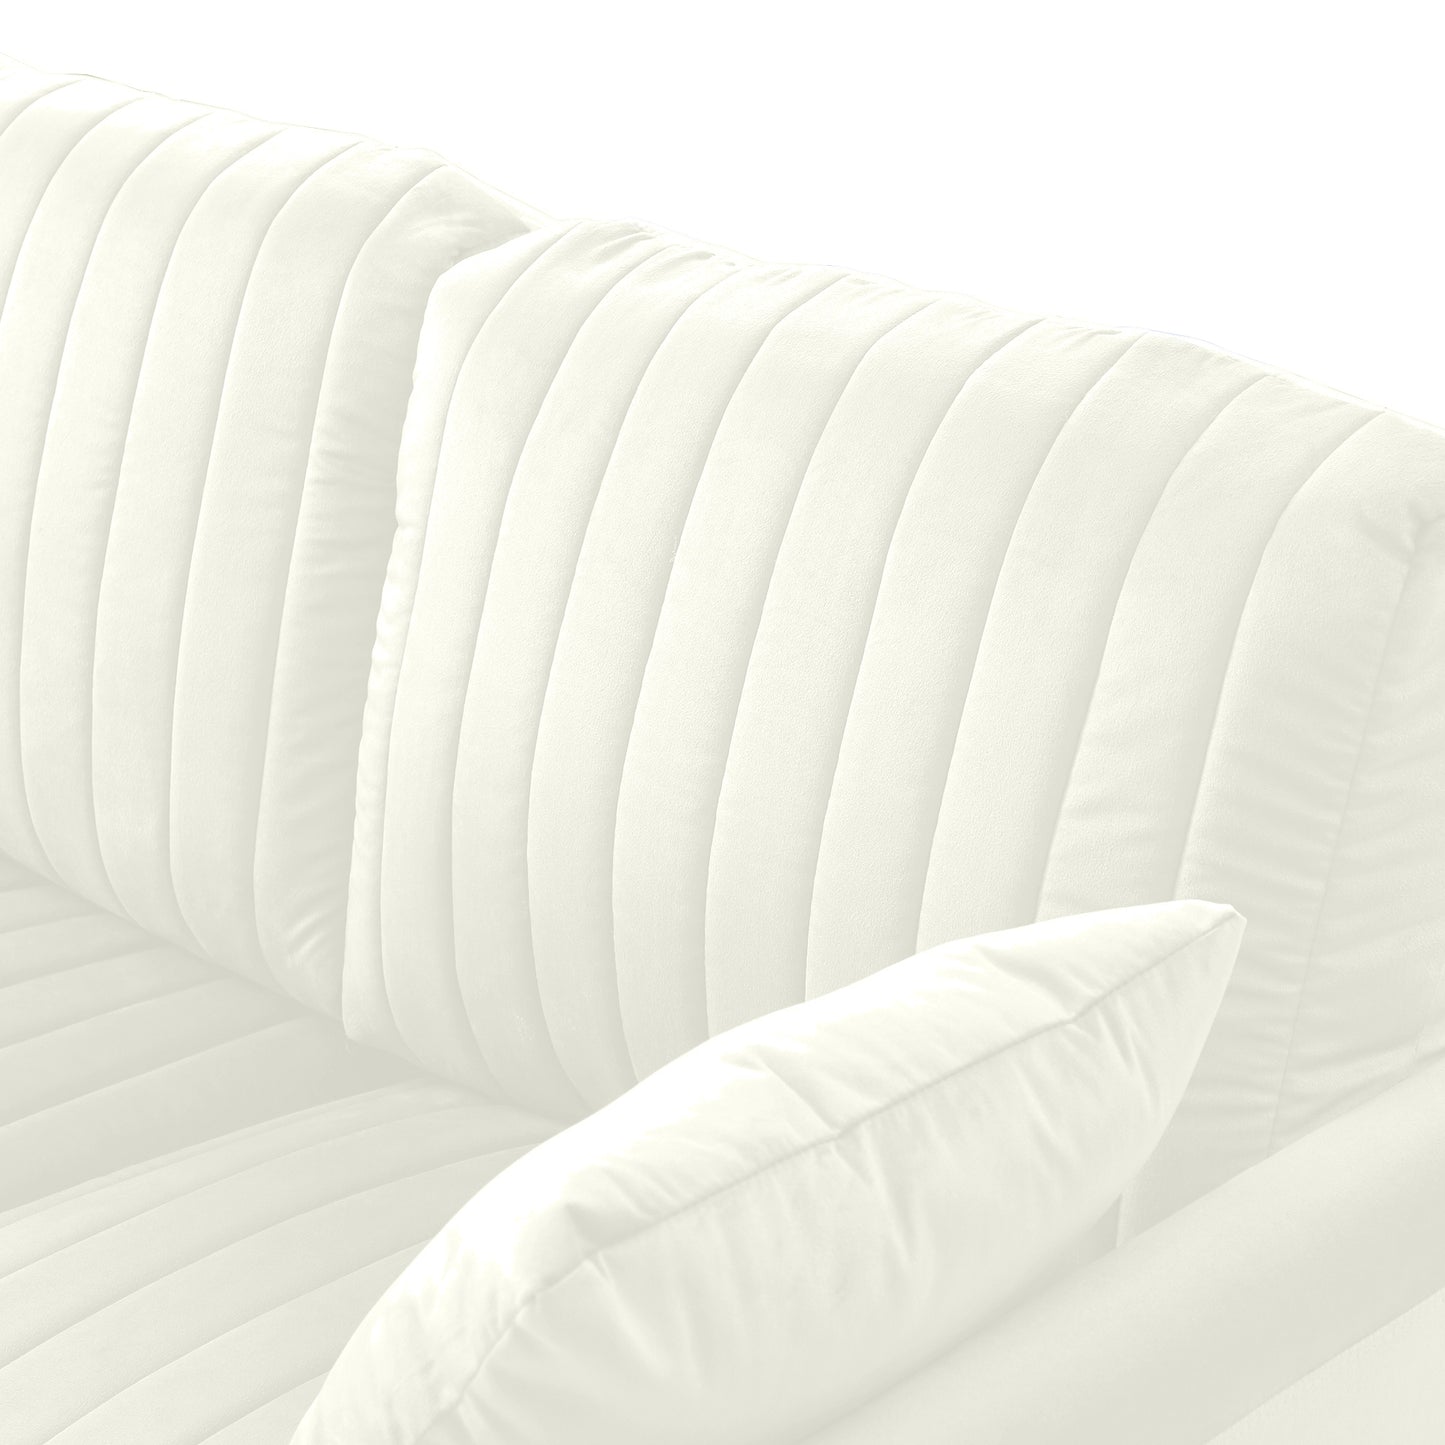 Contemporary Velvet Upholstered 3 Seater Sofa with Deep Channel Tufting and Gold Metal Legs, Cream